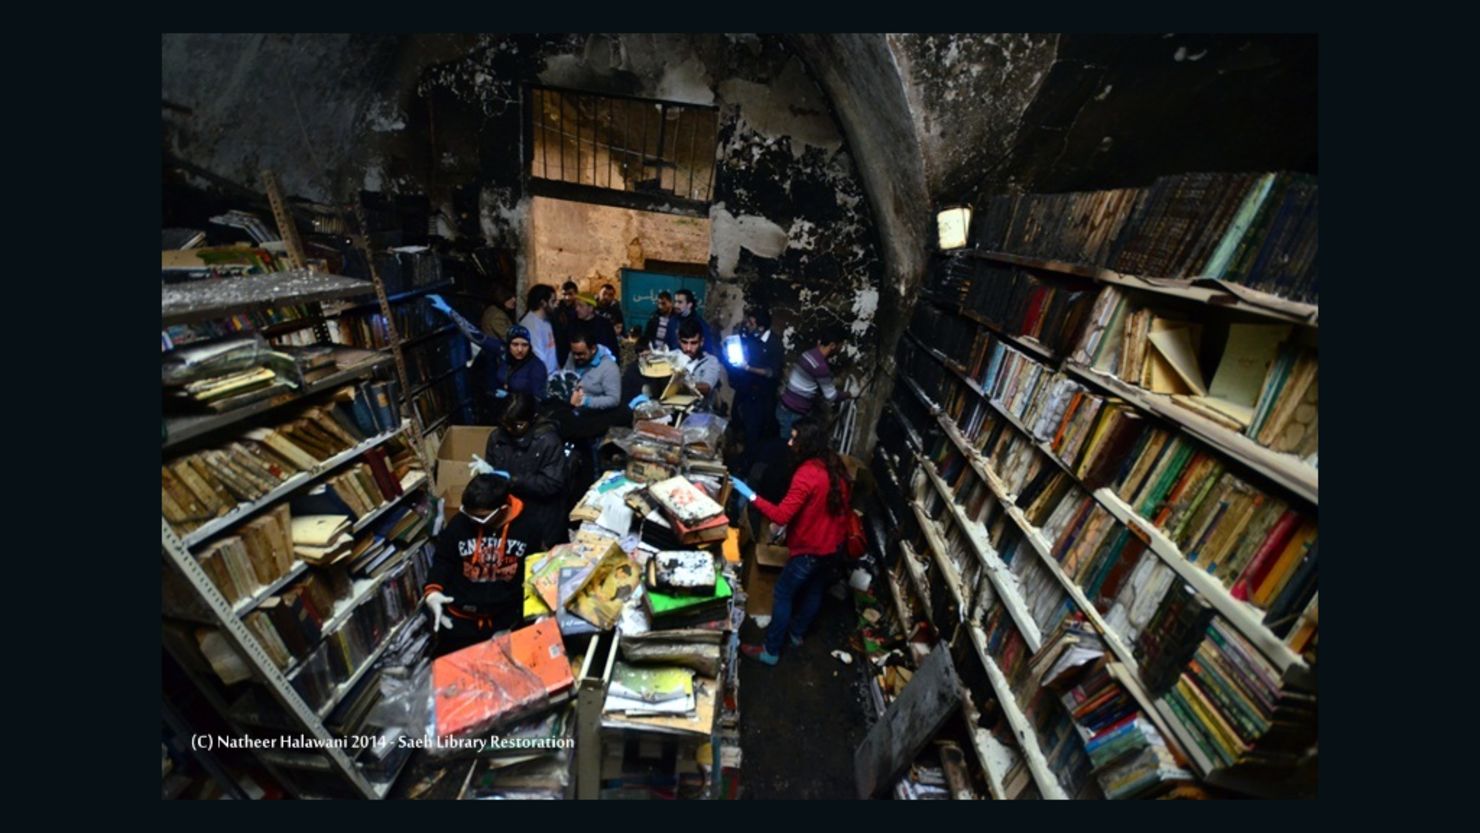 Volunteers hope the $35,000 will be raised to restore the books and building.